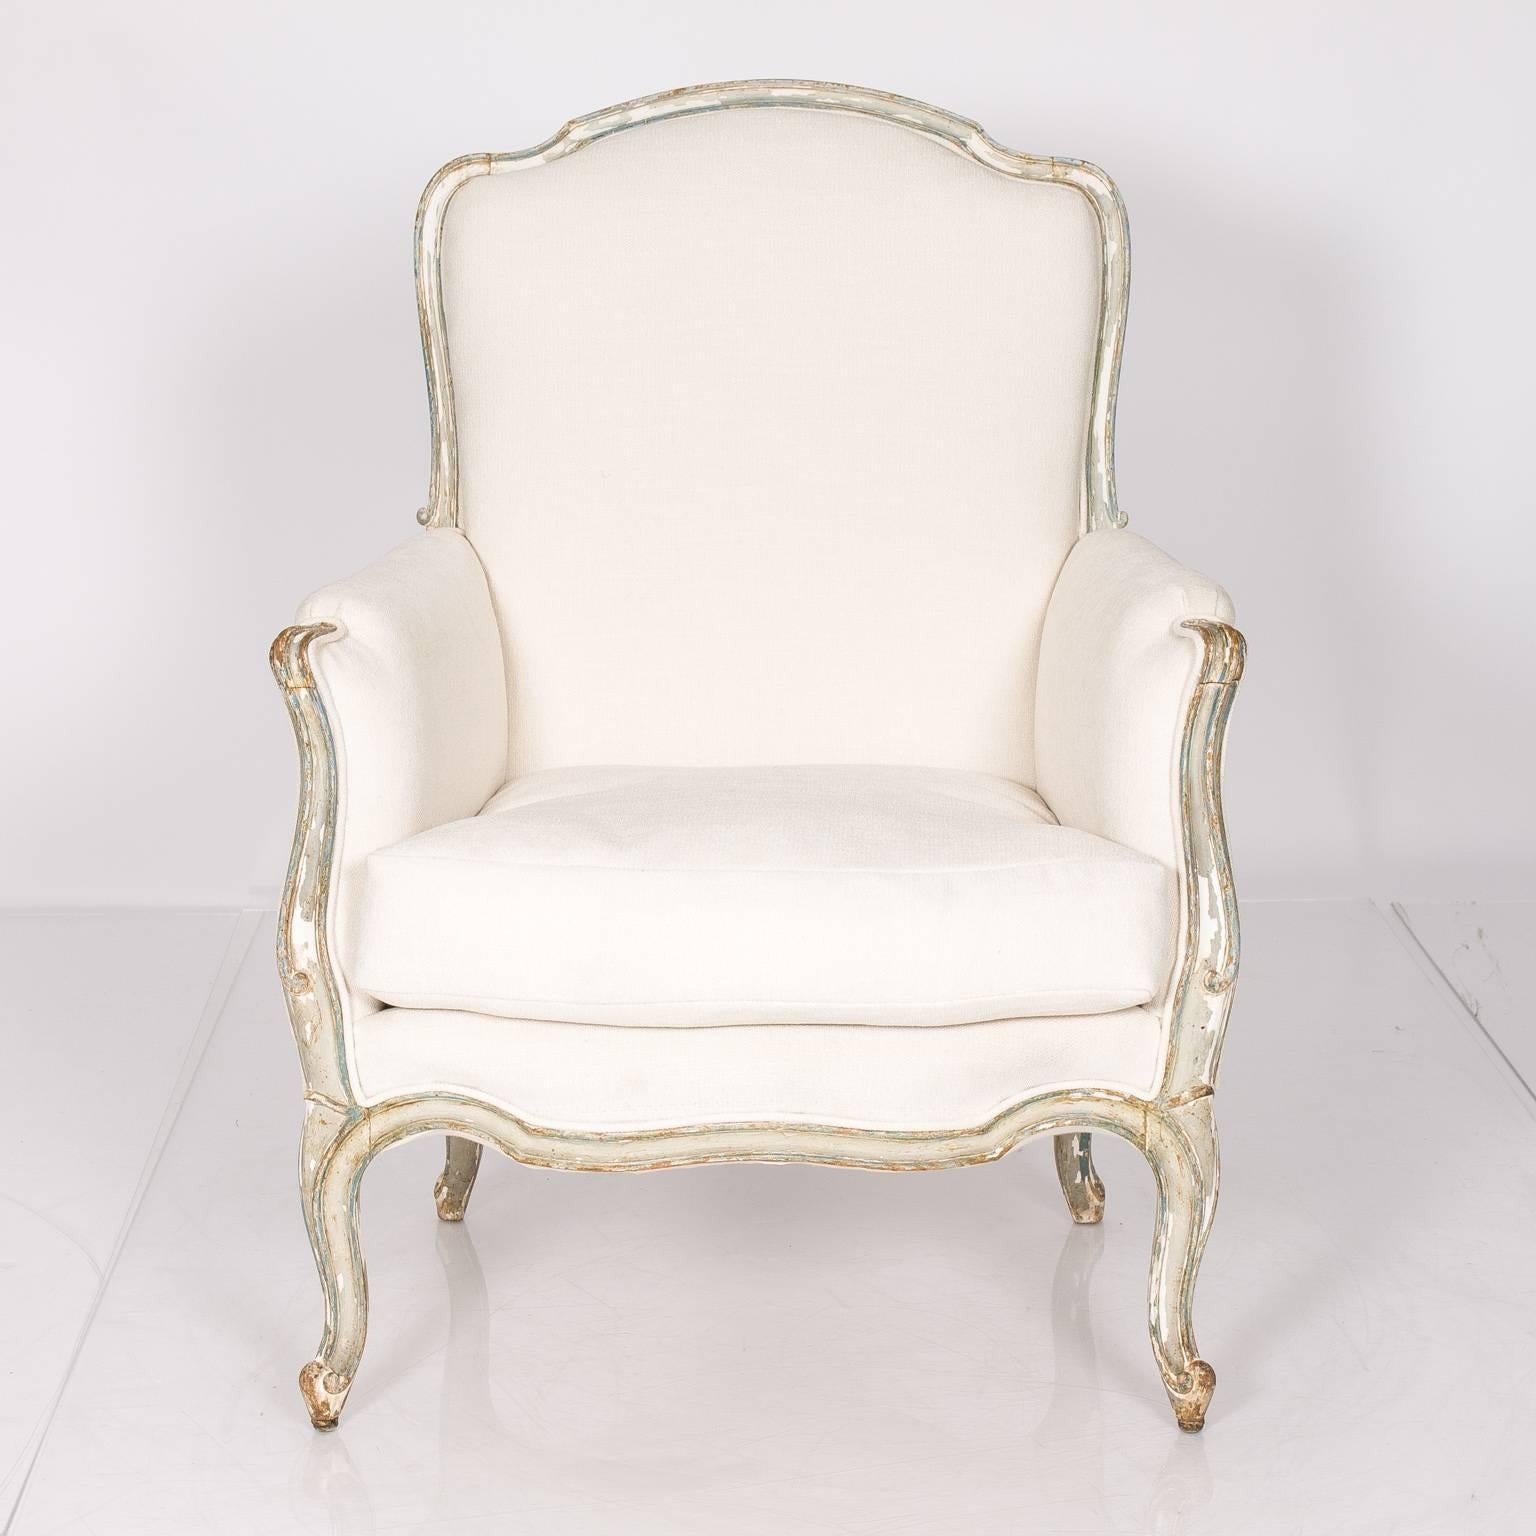 Pair of circa 1875 Italian Bergère chairs, freshly upholstered in white linen blend fabric.
      